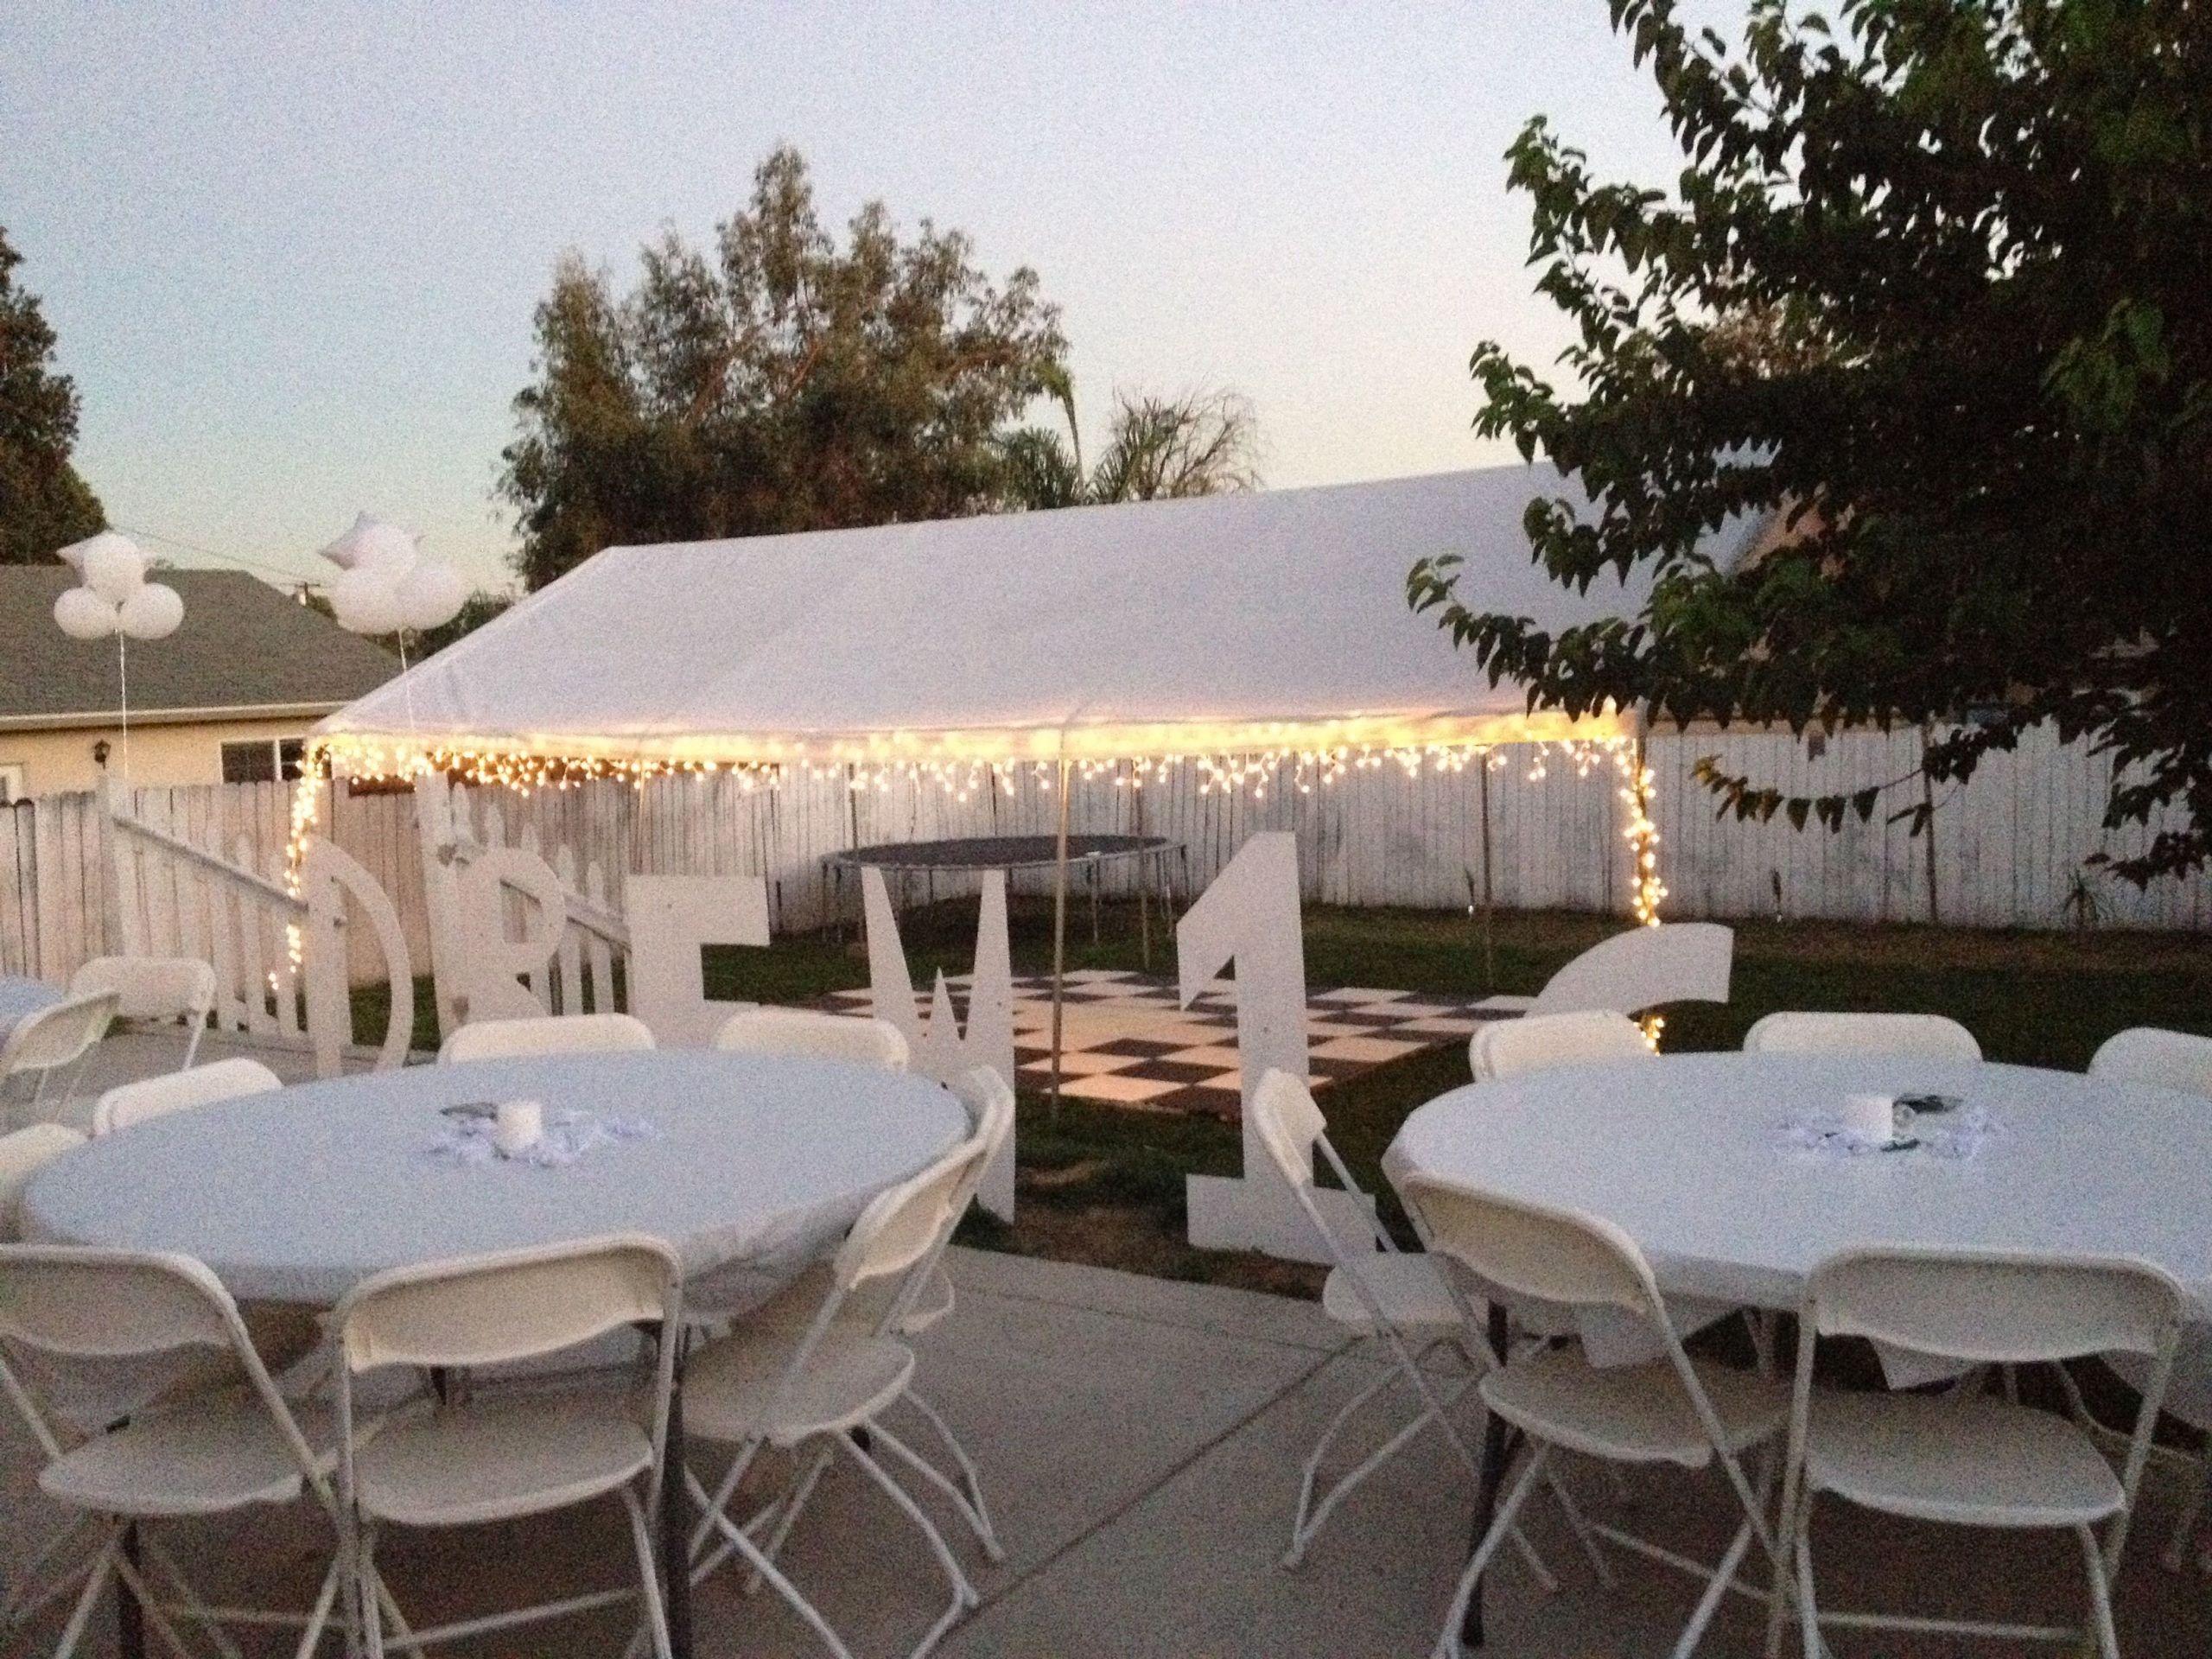 Backyard Birthday Party Ideas Sweet 16
 All white party backyard set up in 2019